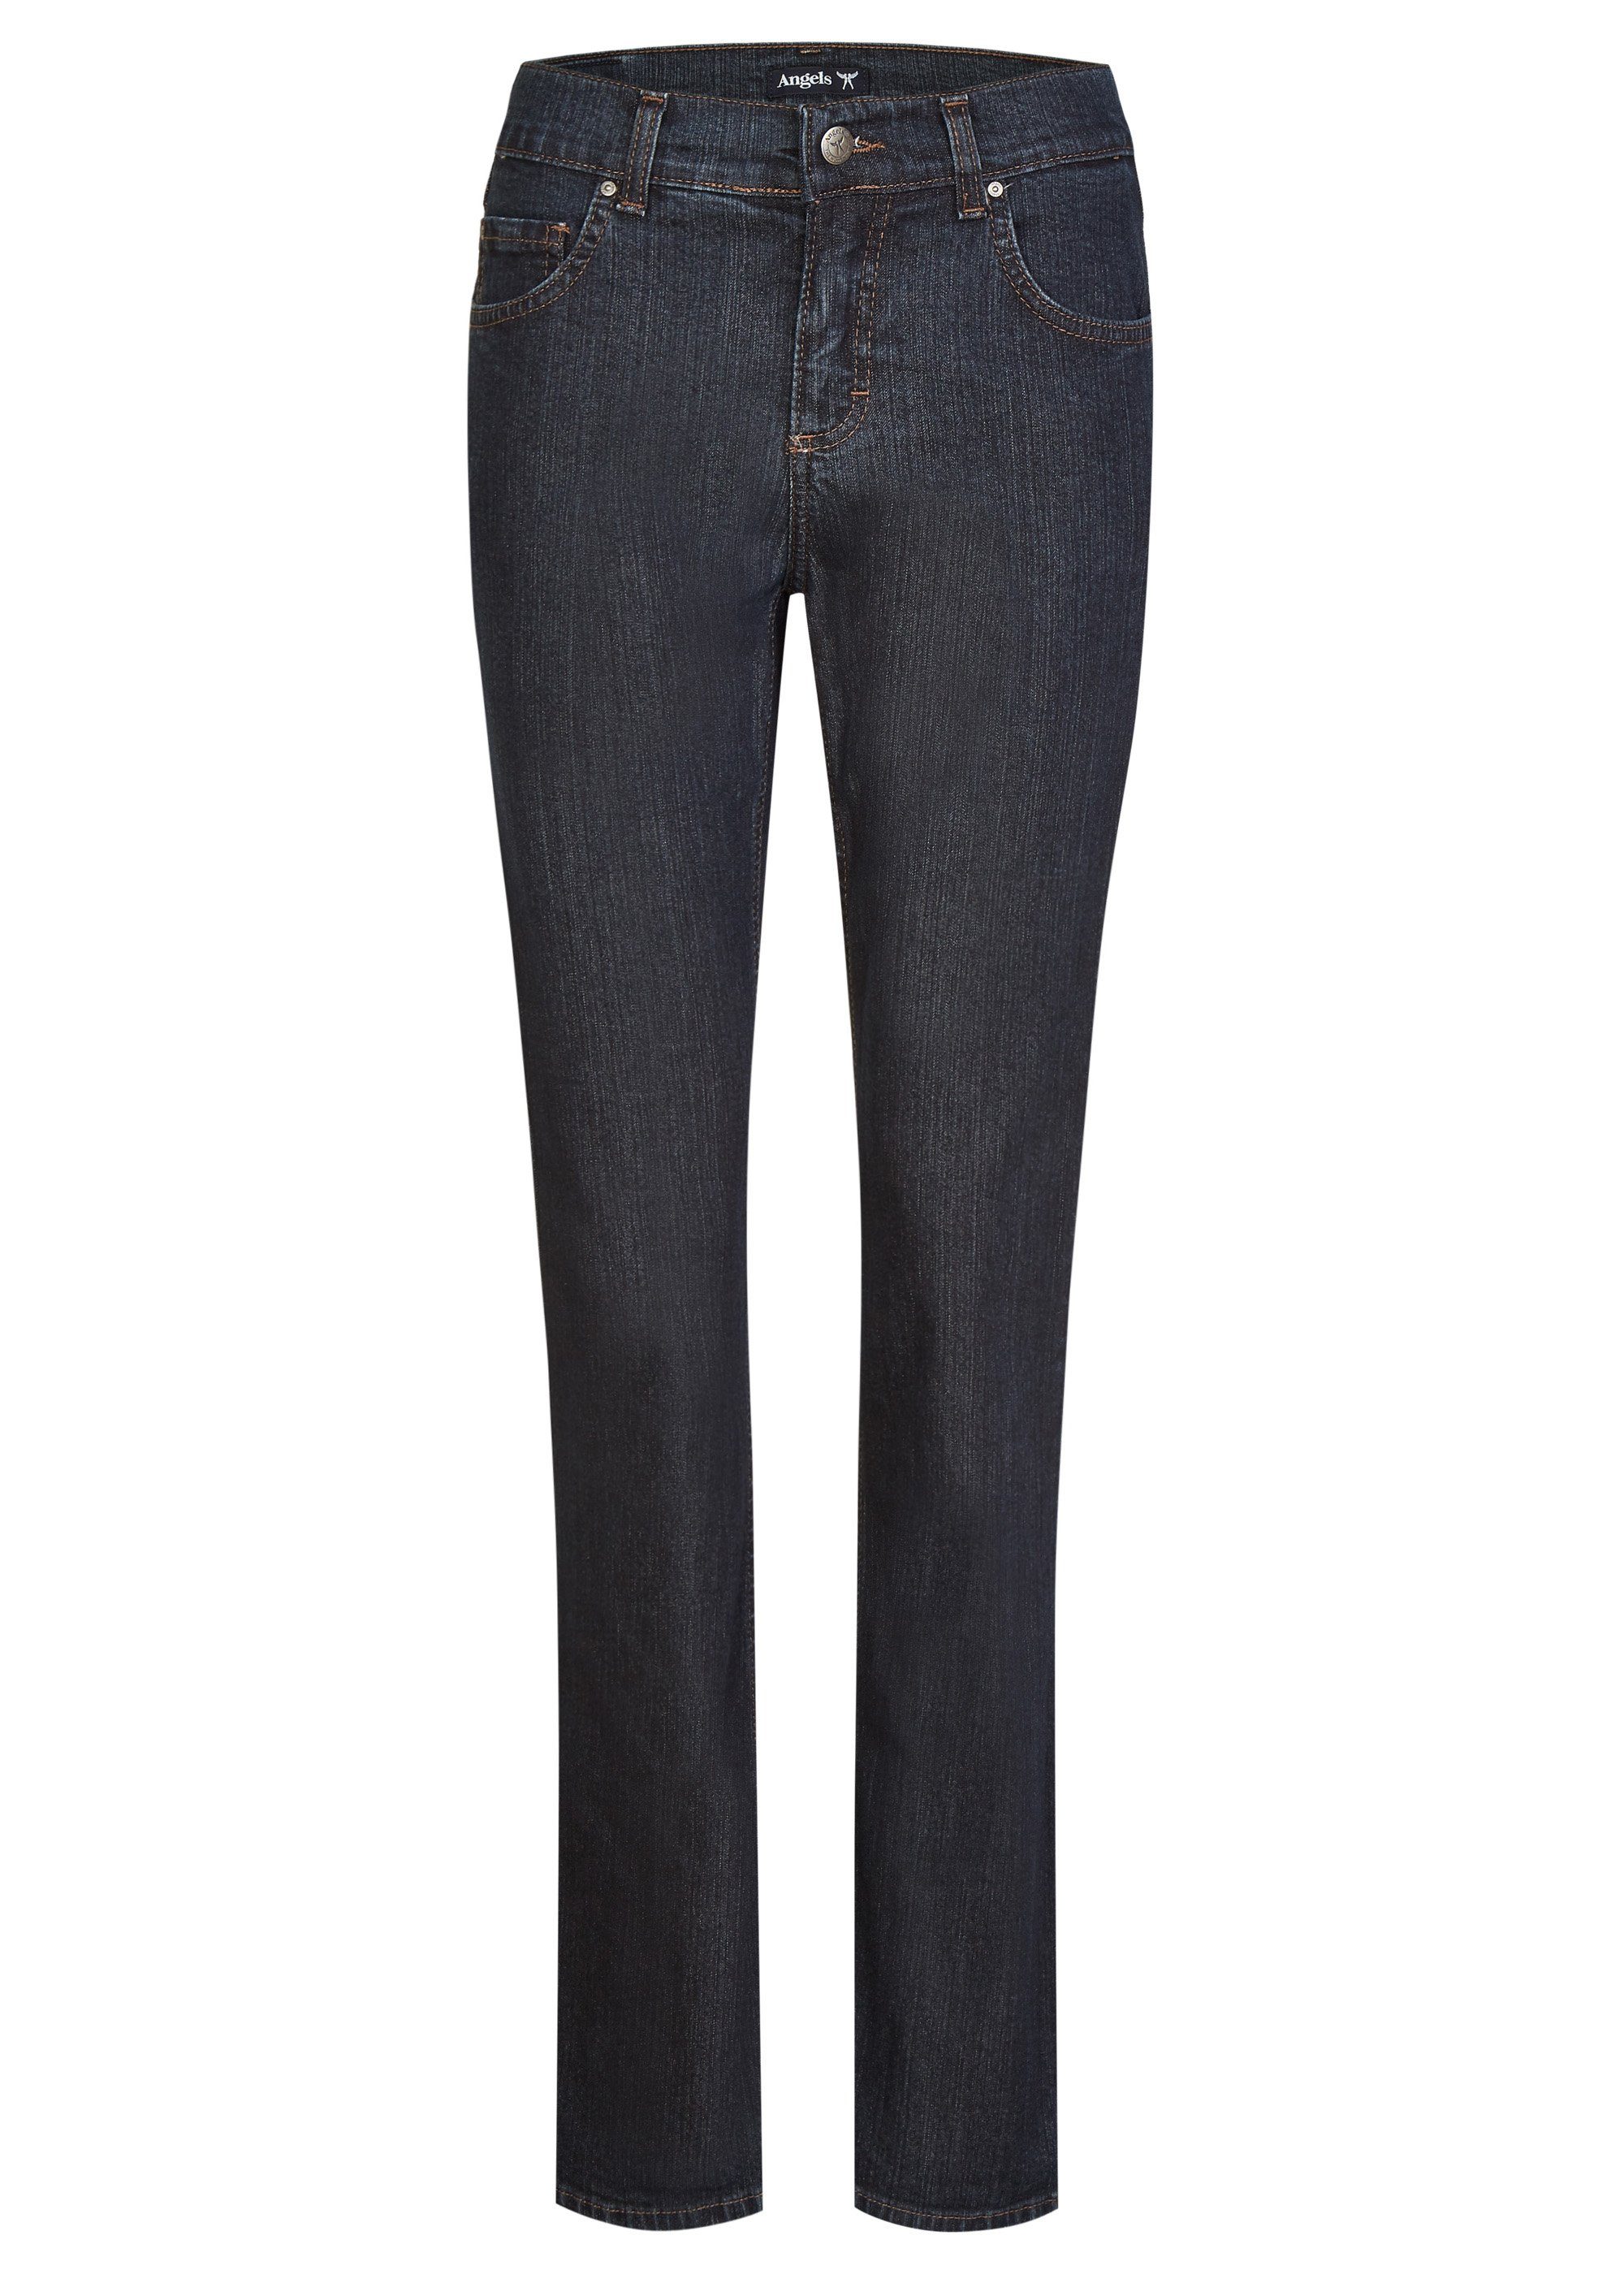 ANGELS Stretch-Jeans 90.30 LUCI ANGELS JEANS night 53 blue